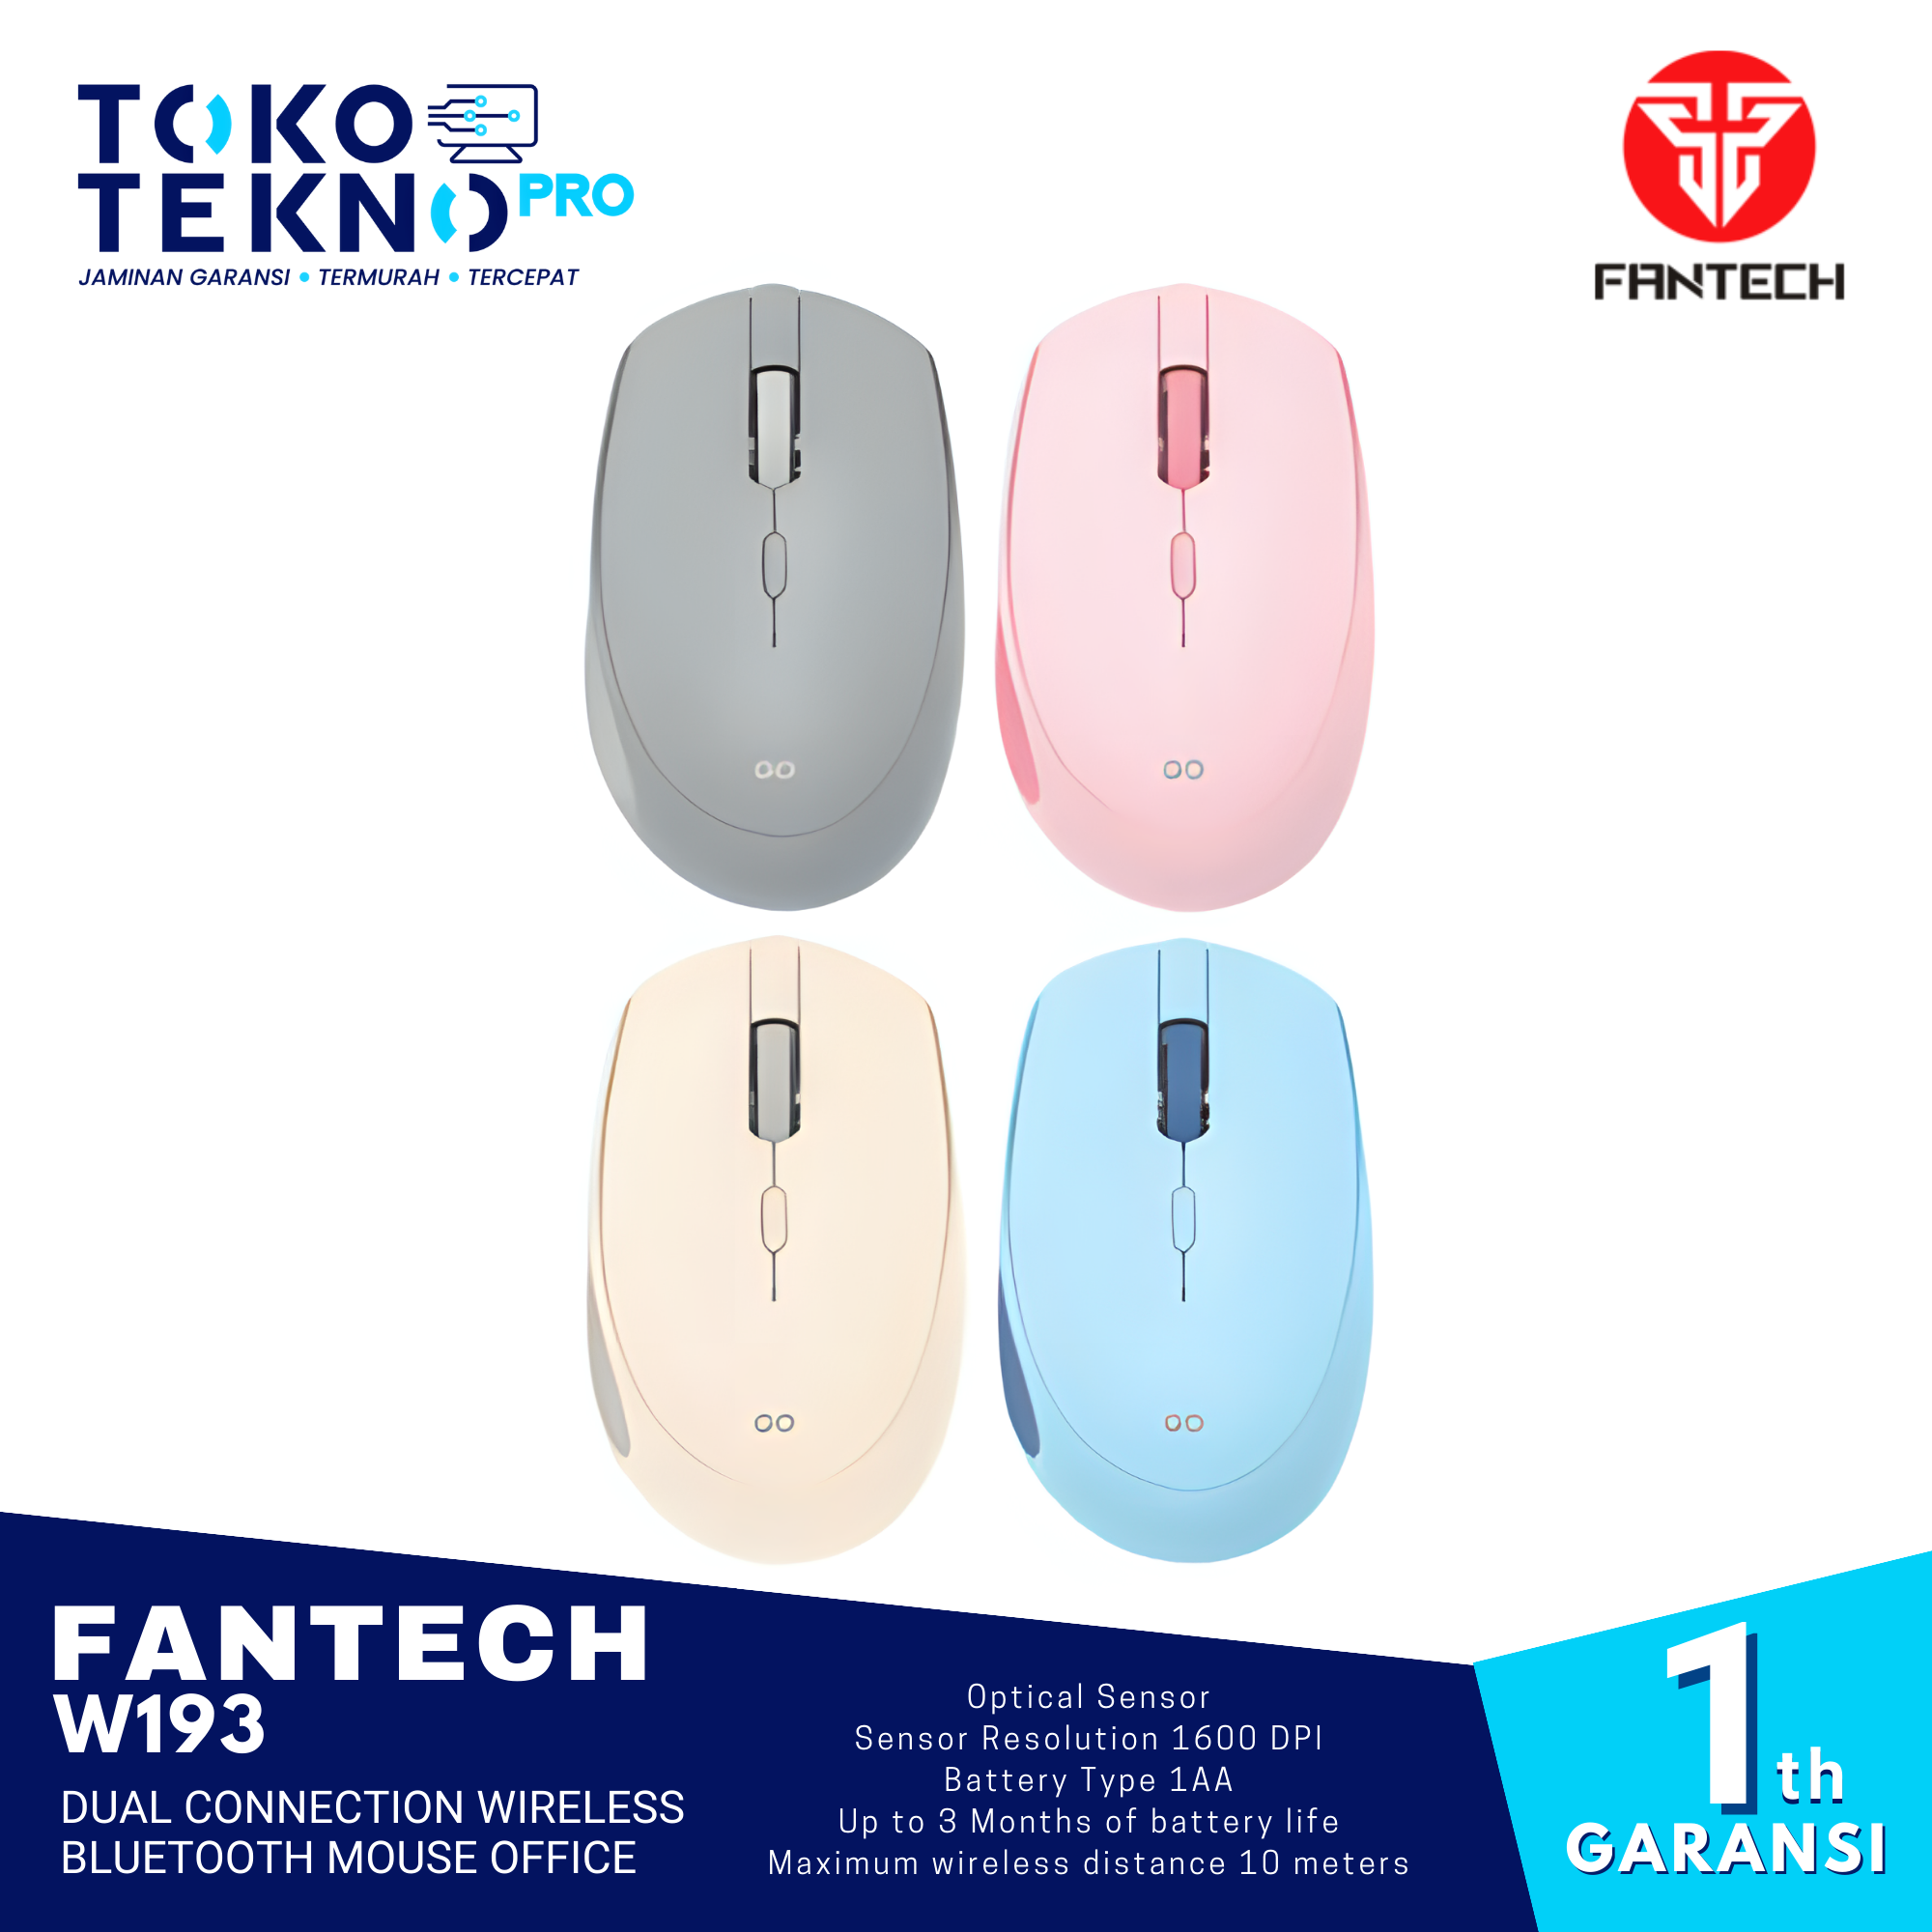 Fantech W193 Dual Connection Wireless Bluetooth Mouse Office